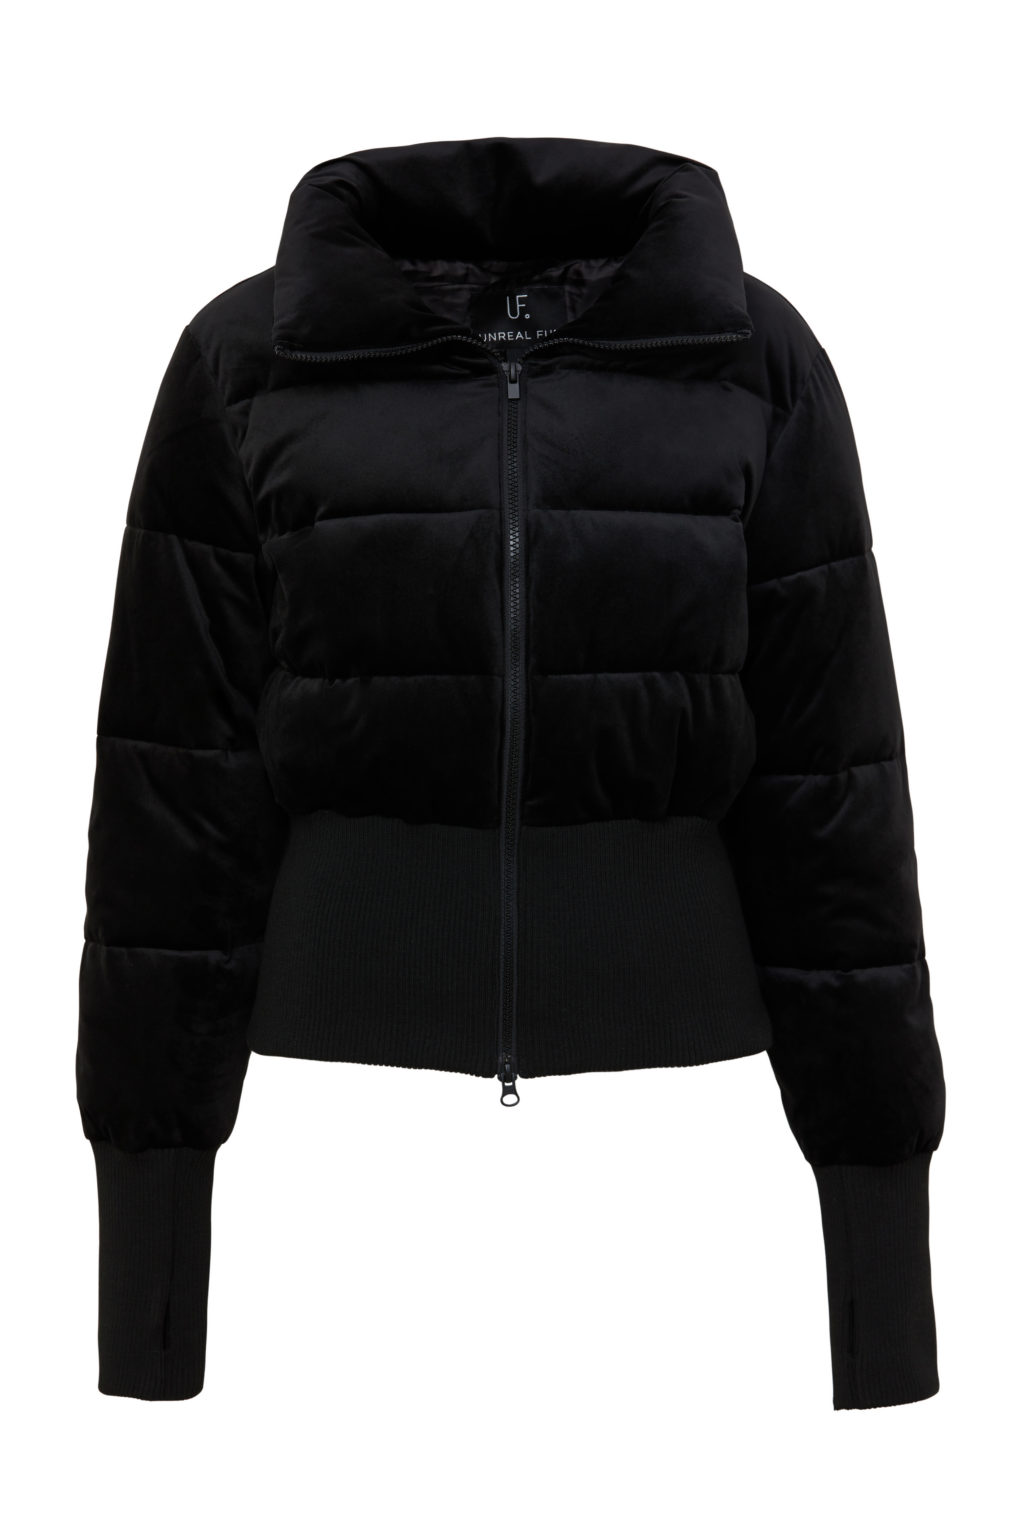 Amsterdam Puffer Jacket | The Style Capsule